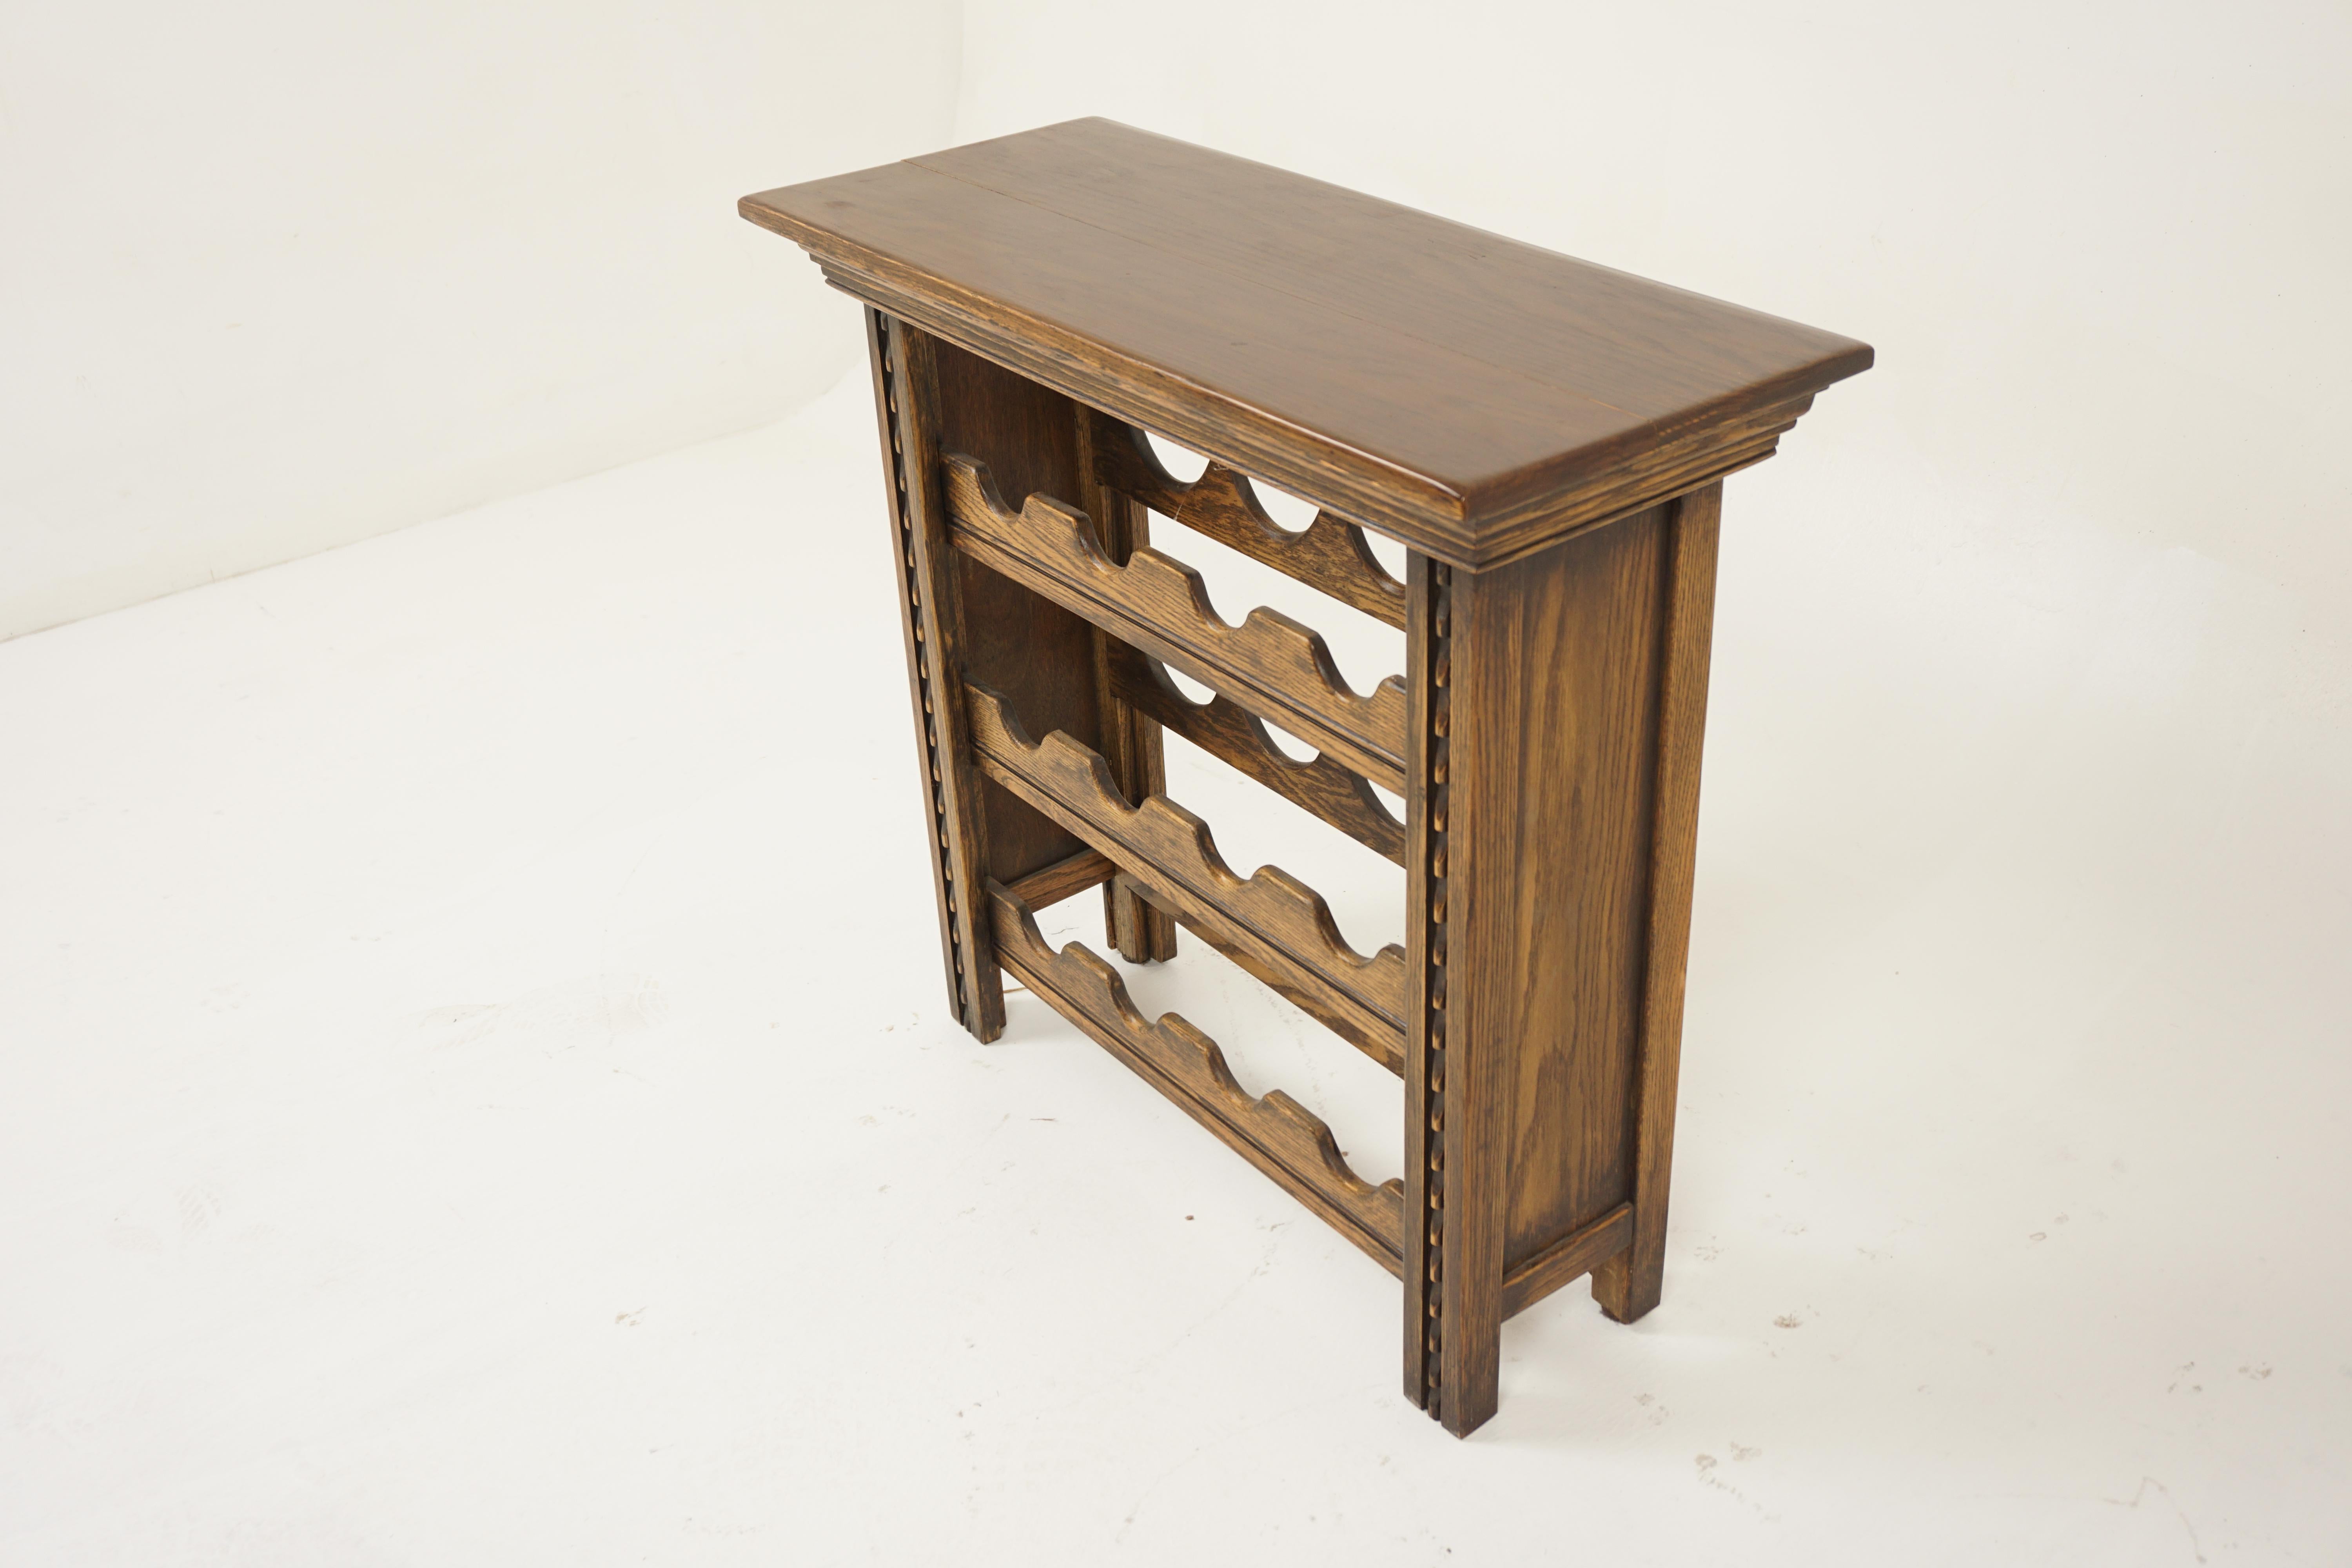 Vintage Carved Oak Free Standing Wine Rack, Canada 1960, H1156

Solid Oak
Original finish
Rectangular moulded top\Four carved supports on each end with solid panels
Three shaped bottle holders in the center
Very good condition
All solid

30